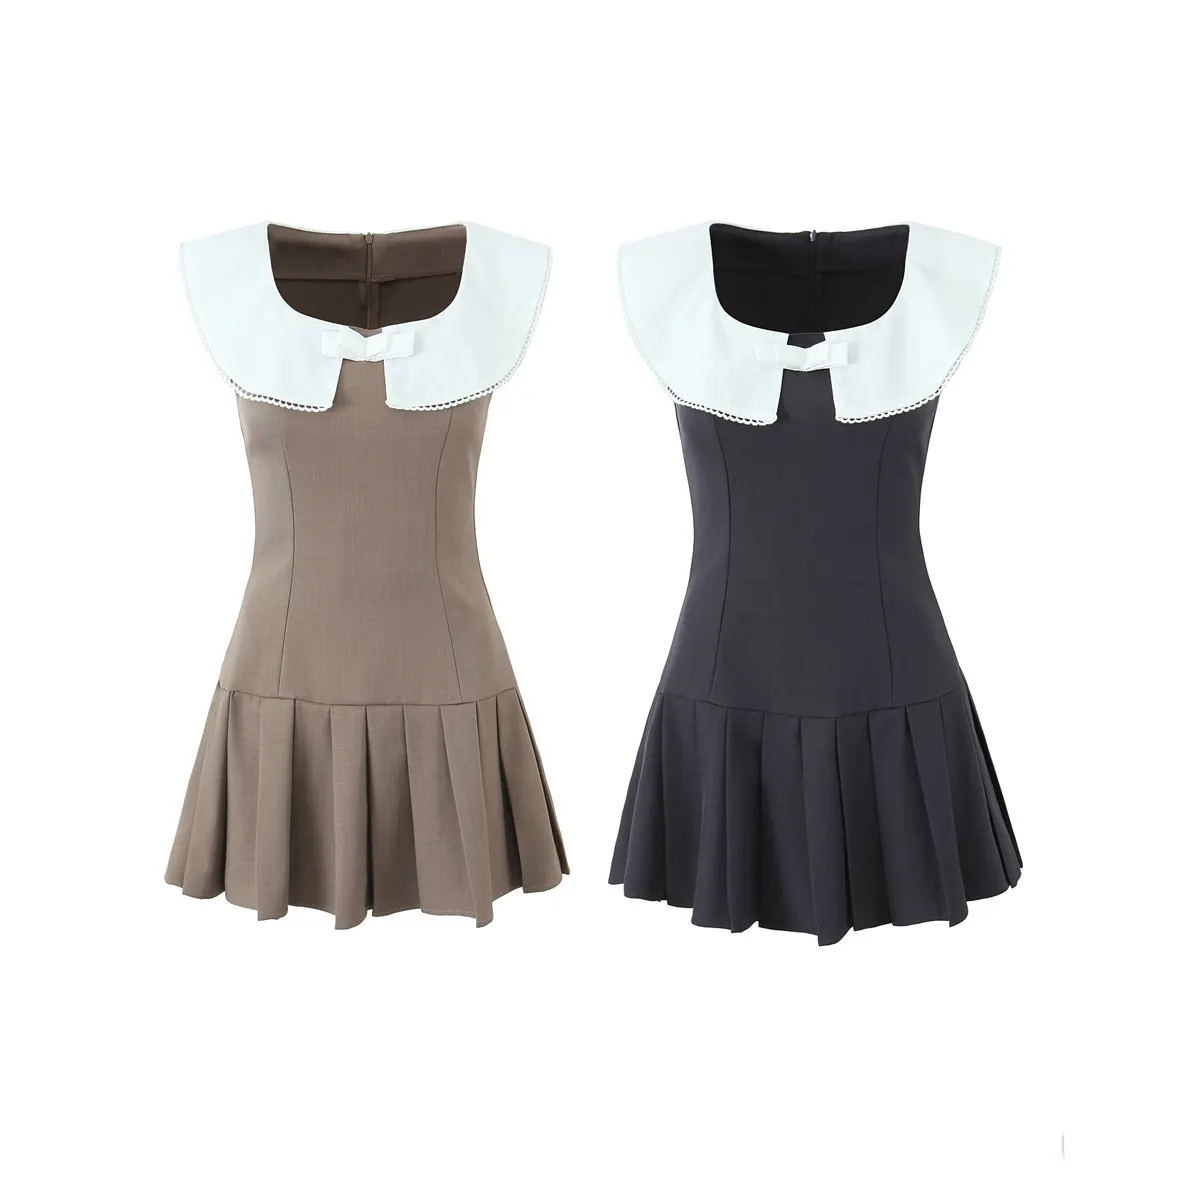 2 colorway solid color peter pan collar zipper fly casual fashion summer mini dress for women